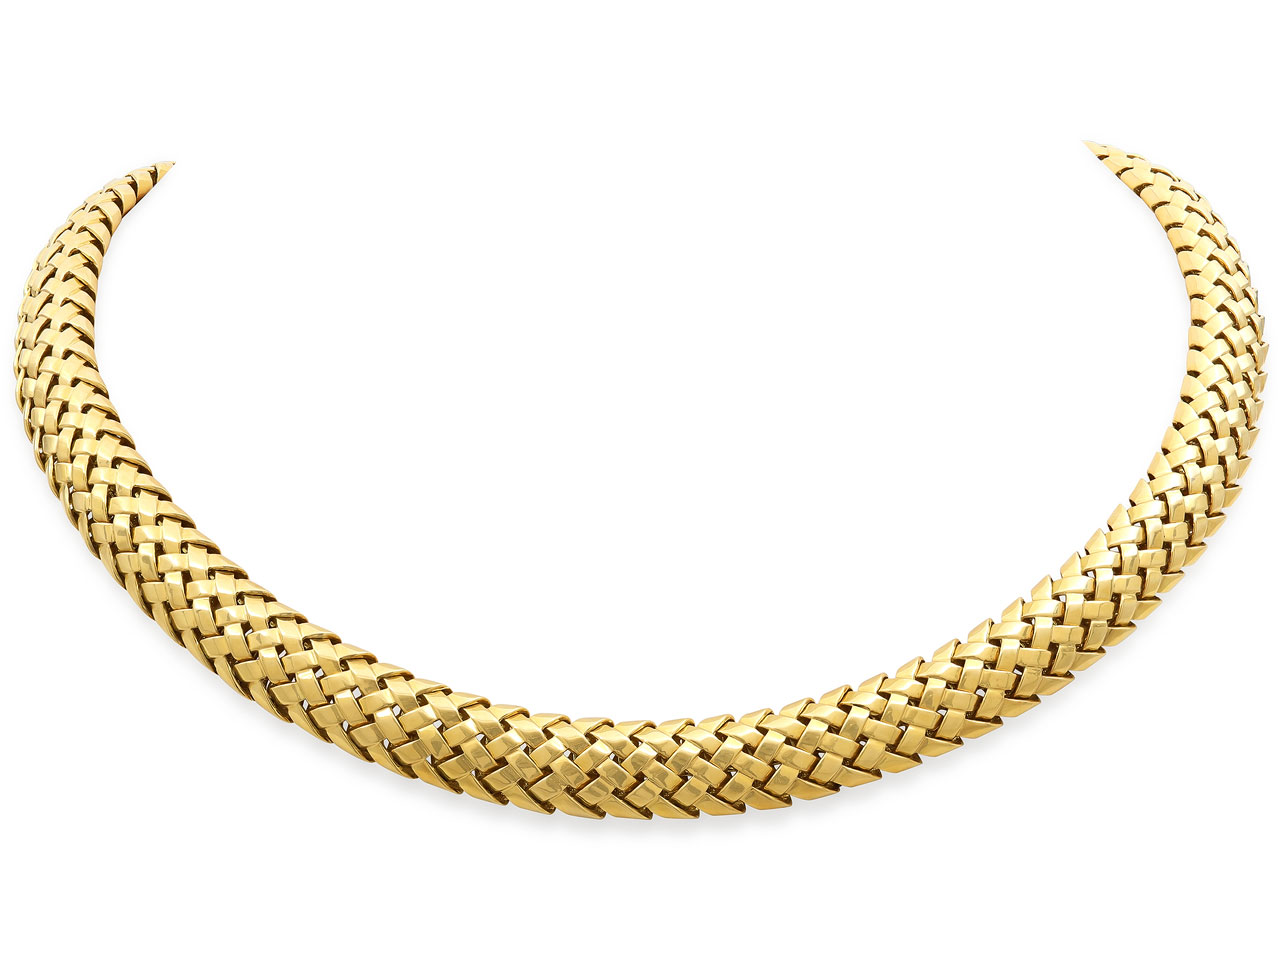 Tiffany & Co 'Vannerie' Necklace in 18K Gold